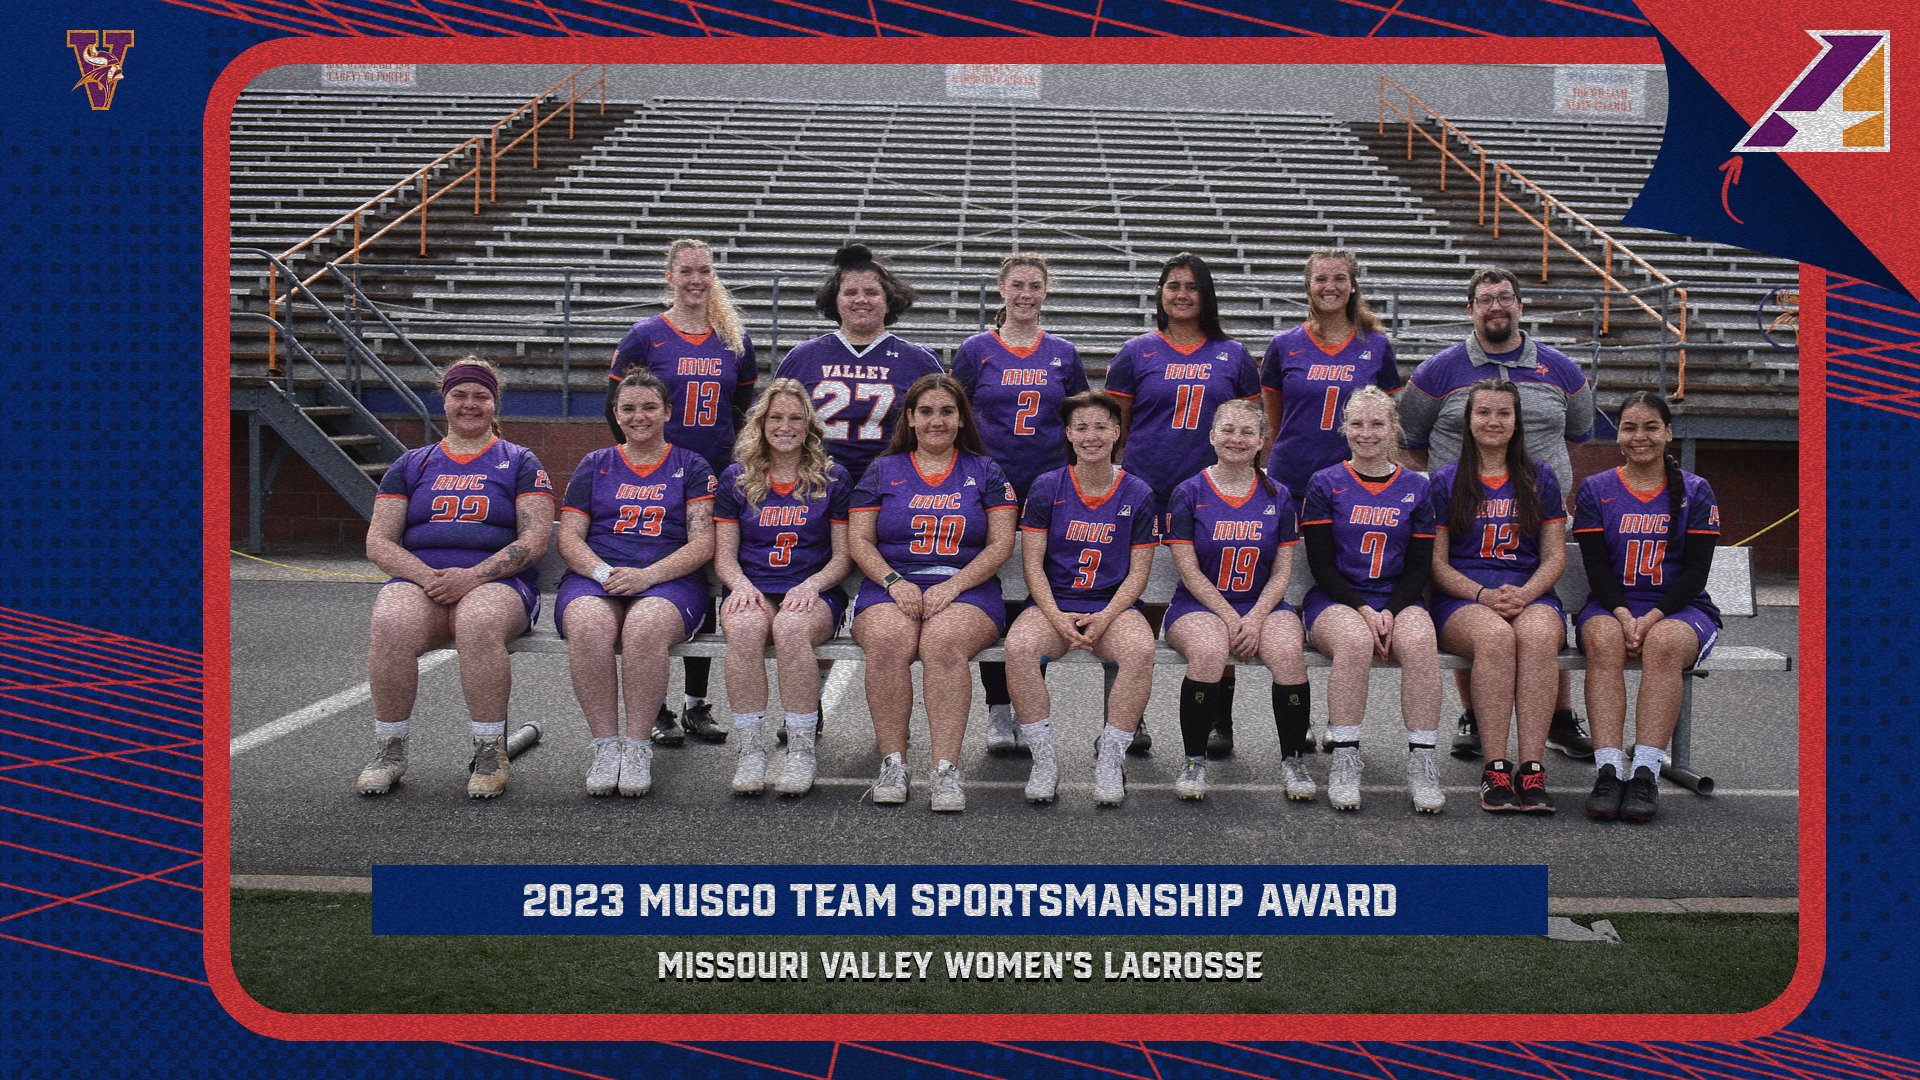 Missouri Valley Women’s Lacrosse Selected for First-Ever 2023 Musco Team Sportsmanship Award